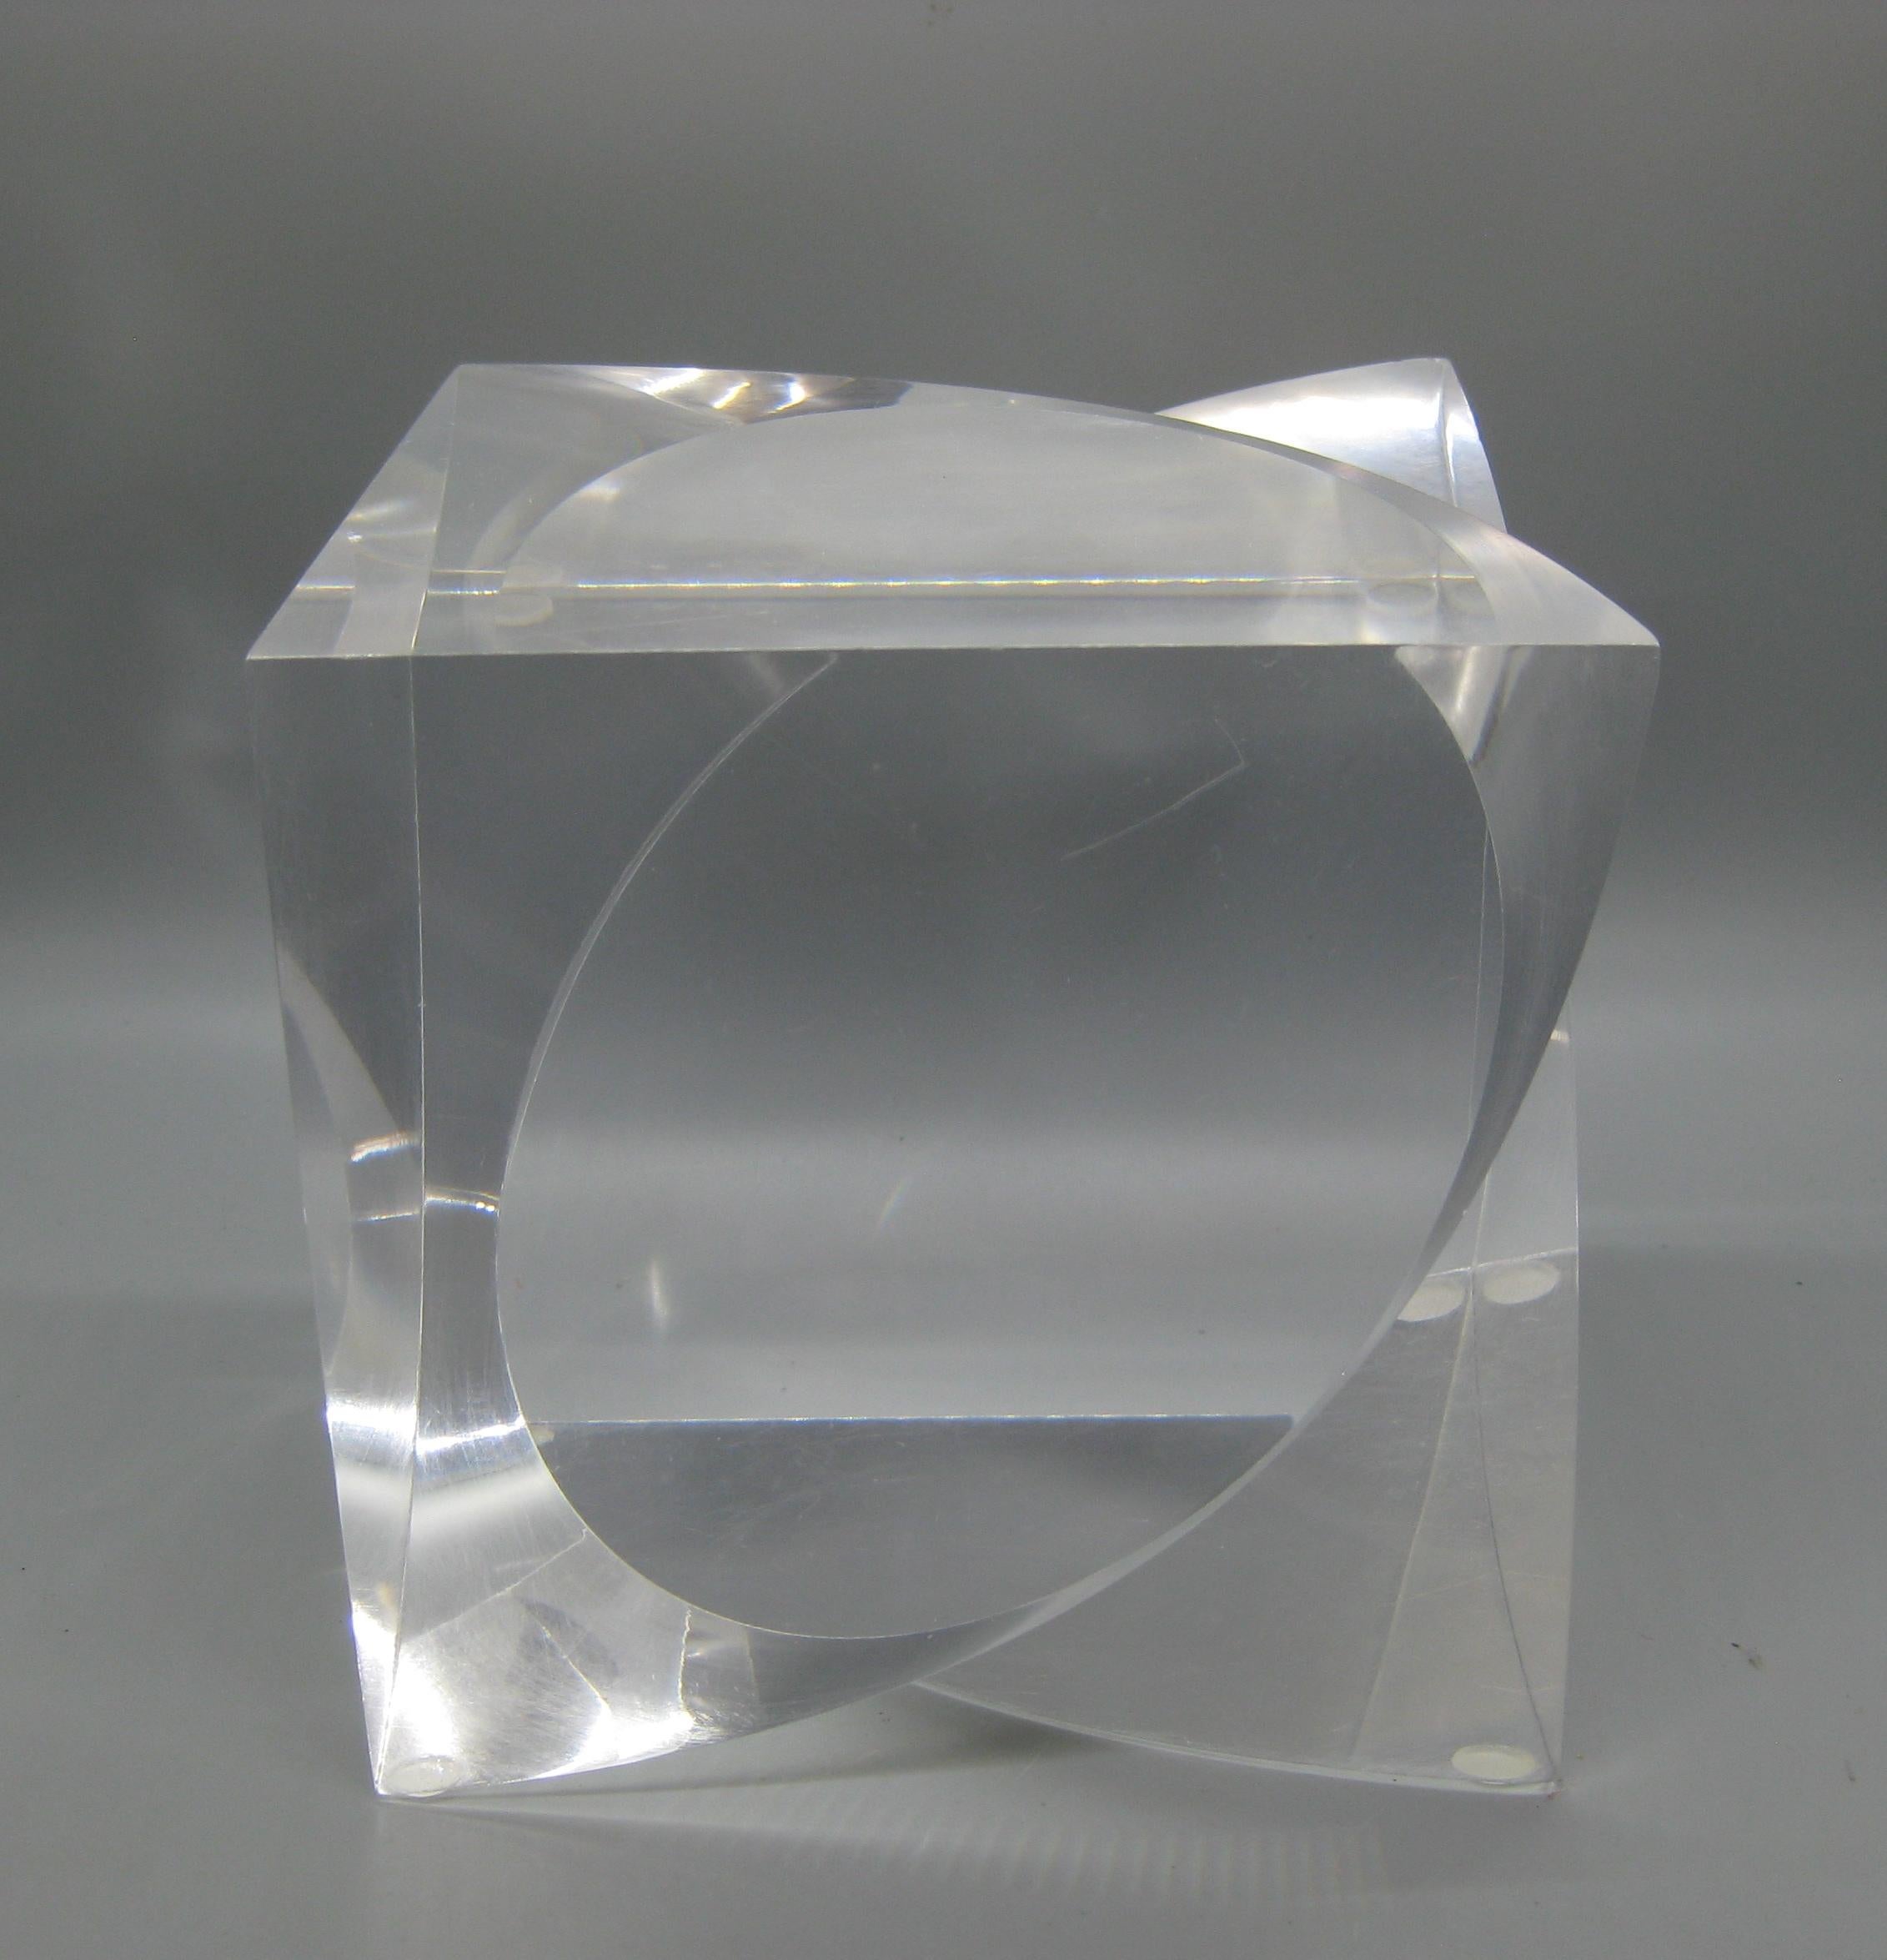 American 1960's-1970's Lucite Acrylic Optical Op-Art Large Cube Abstract Sculpture For Sale